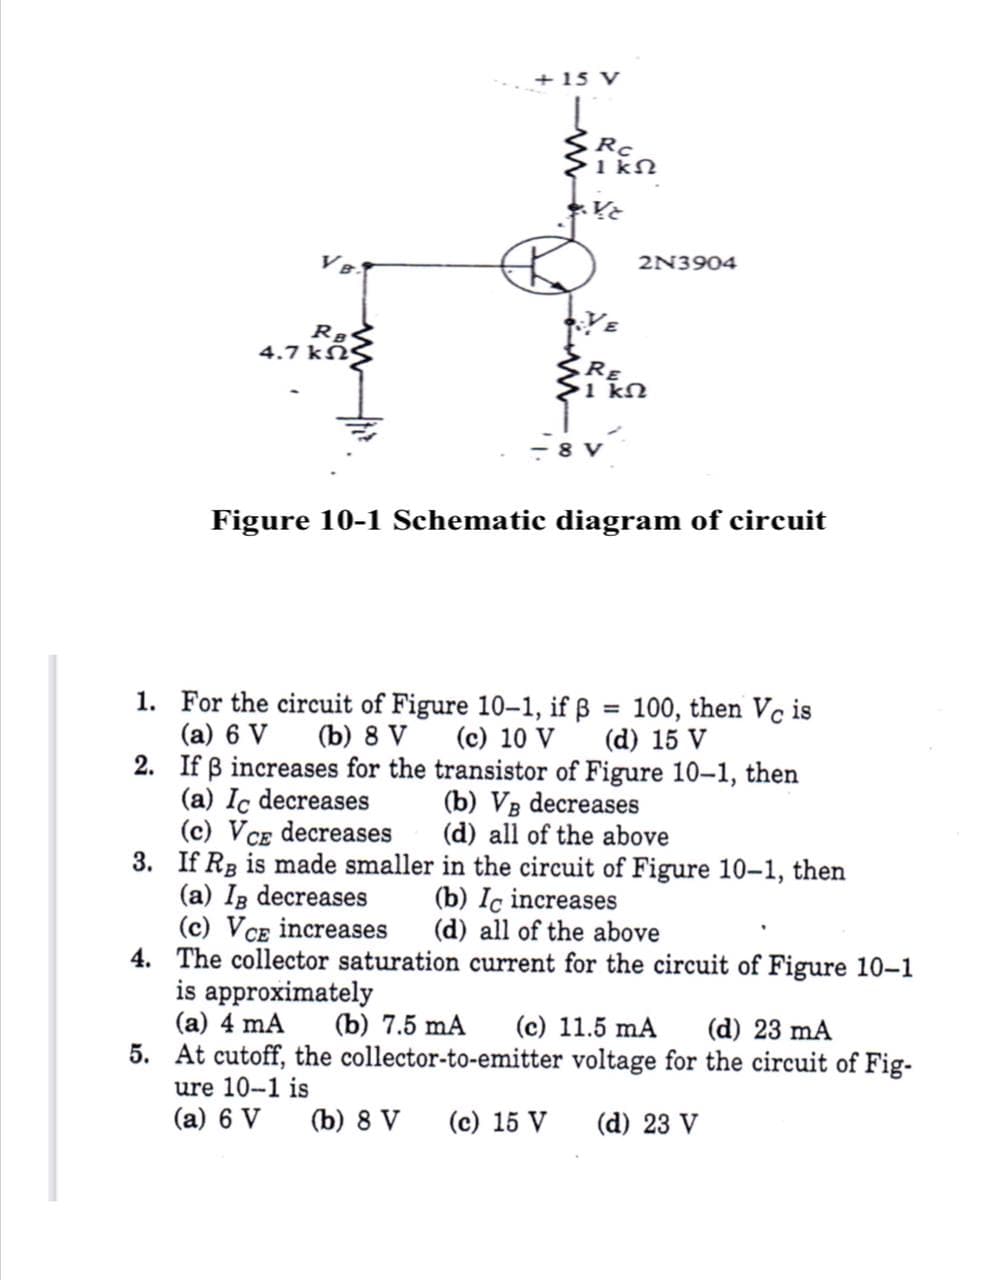 + 15 V
Rc
1 kN
2N3904
4.7 kNS
RE
>1 kN
-8 V
Figure 10-1 Schematic diagram of circuit
1. For the circuit of Figure 10-1, if ß = 100, then Vc is
(a) 6 V
2. If ß increases for the transistor of Figure 10–1, then
(a) Ic decreases
(c) VCE decreases
3. If Rg is made smaller in the circuit of Figure 10-1, then
(a) Ig decreases
(c) VCE increases
4. The collector saturation current for the circuit of Figure 10-1
is approximately
(a) 4 mA
5. At cutoff, the collector-to-emitter voltage for the circuit of Fig-
(b) 8 V
(c) 10 V
(d) 15 V
(b) VB decreases
(d) all of the above
(b) Ic increases
(d) all of the above
(b) 7.5 mA
(c) 11.5 mA
(d) 23 mA
ure 10-1 is
(a) 6 V
(b) 8 V
(c) 15 V
(d) 23 V
